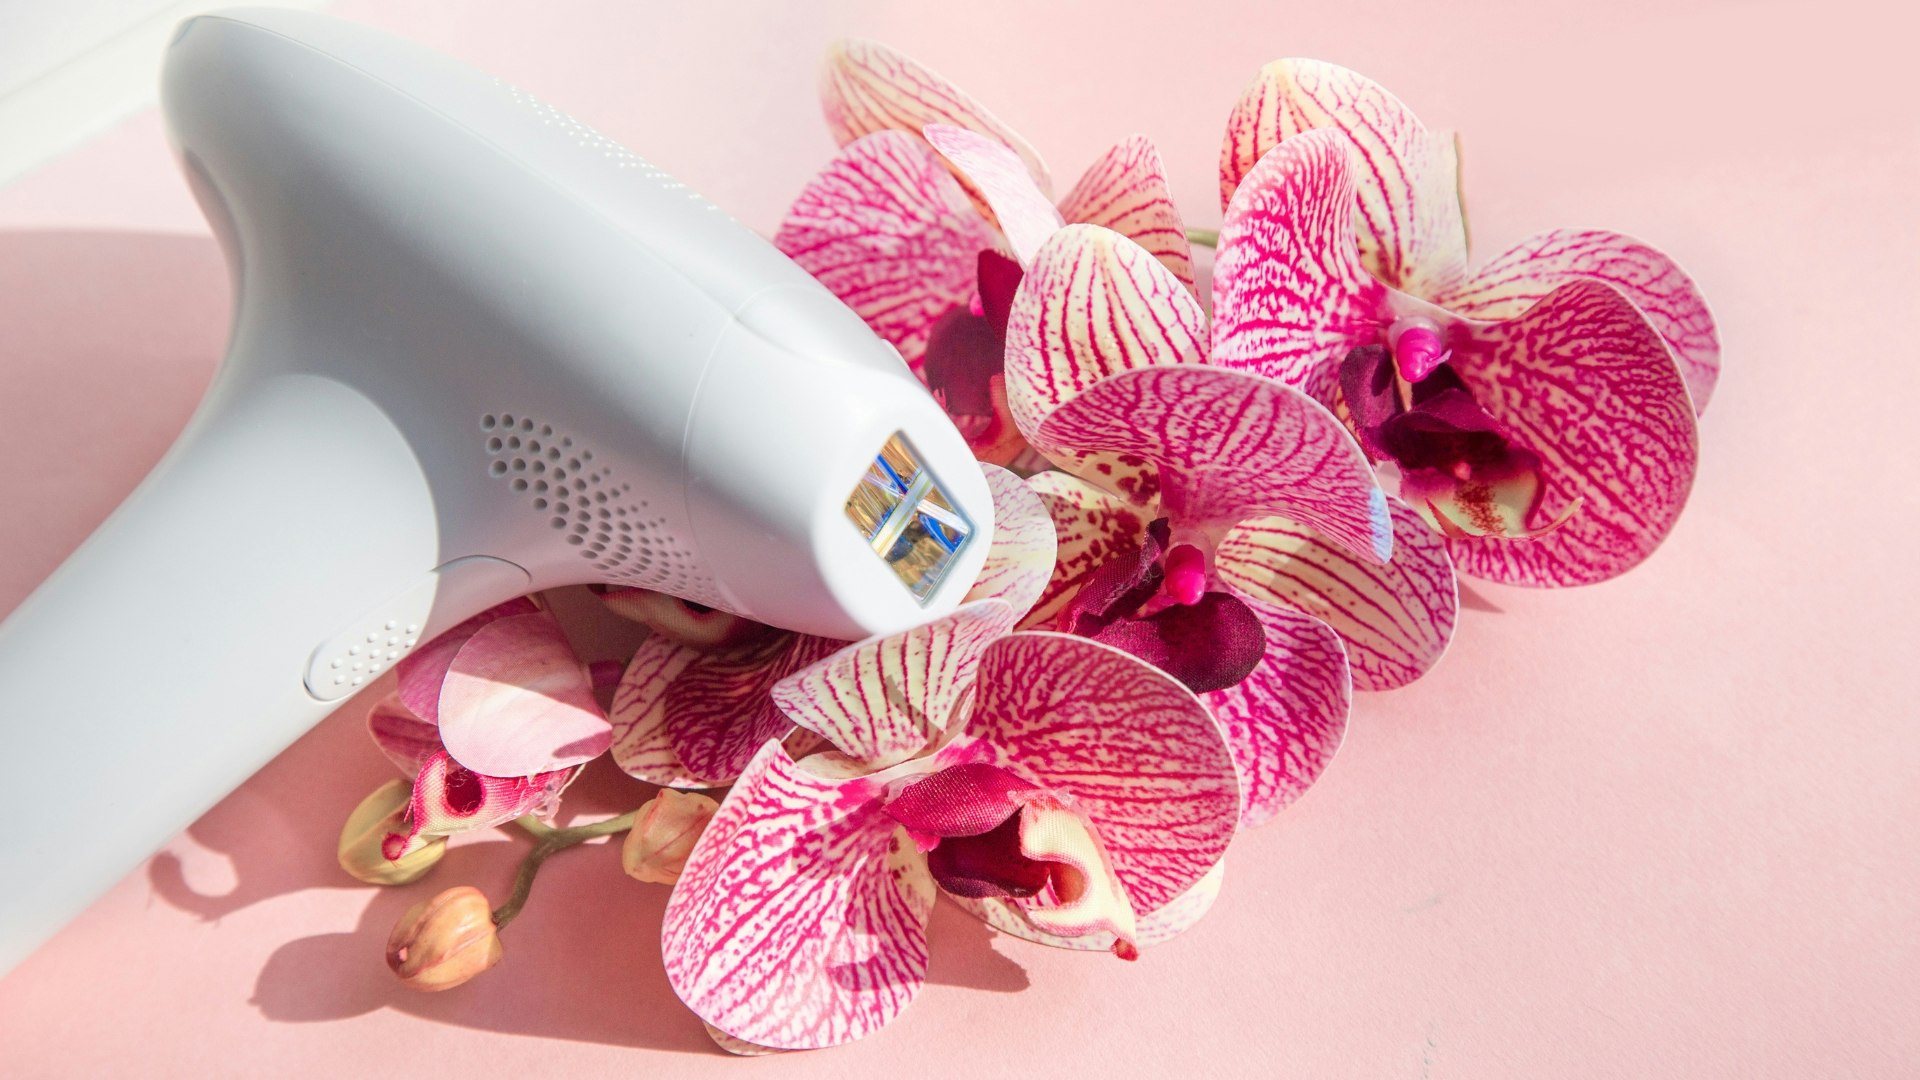 The Best Laser Hair Removal Devices